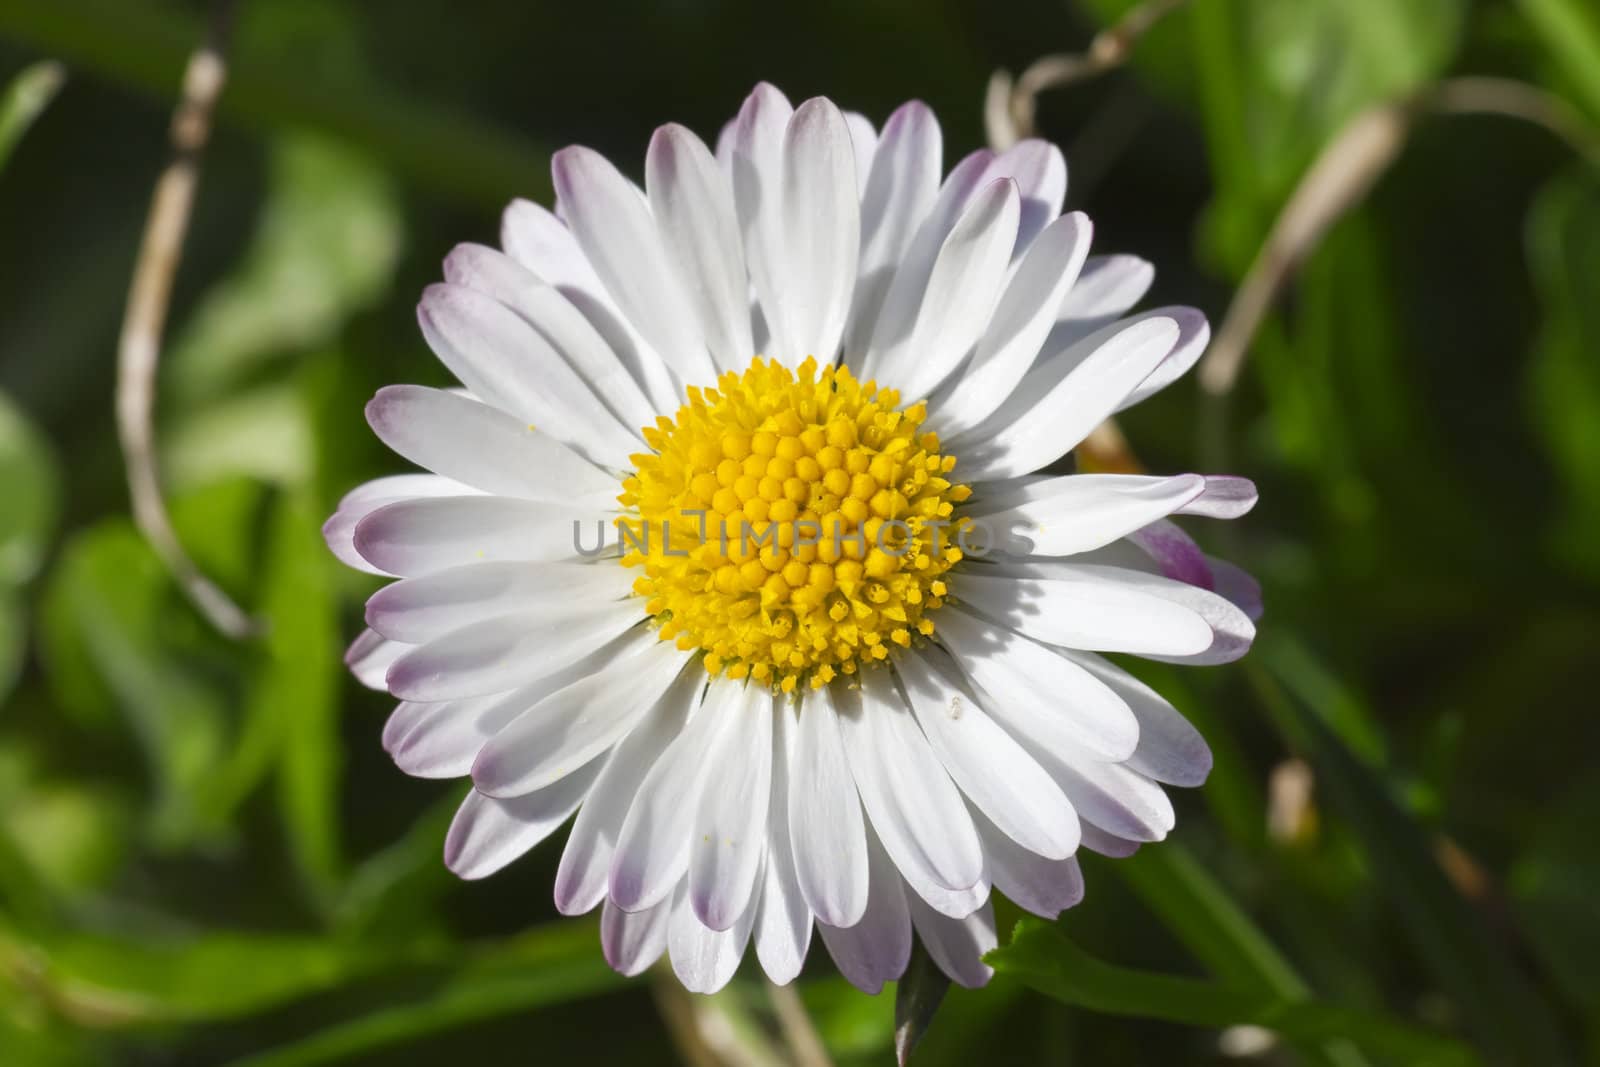 This image shows a macro from a little daisy